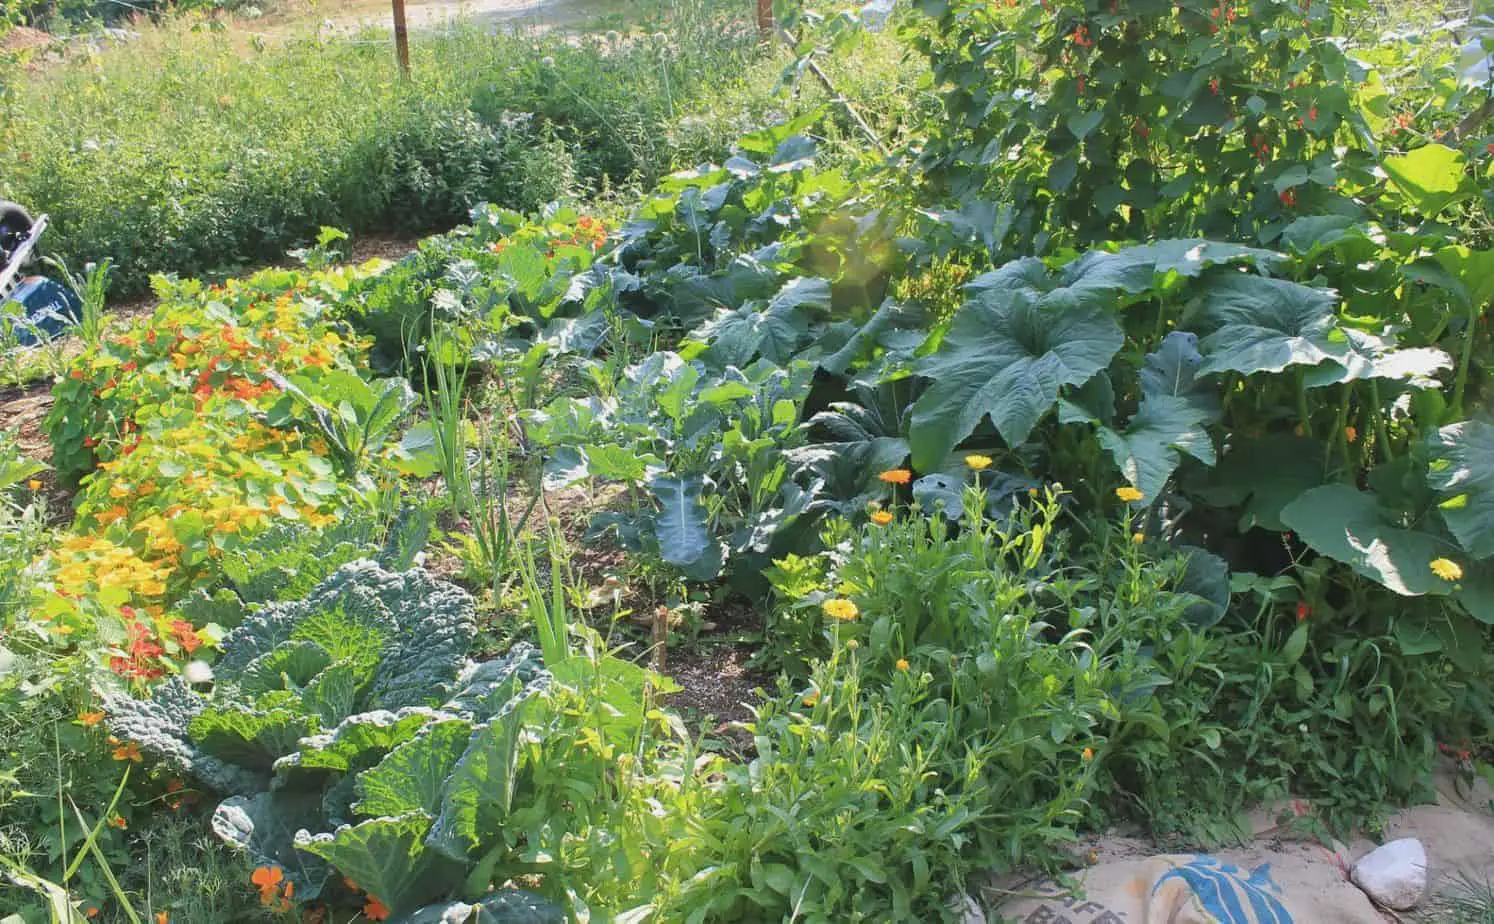 Permaculture gardening